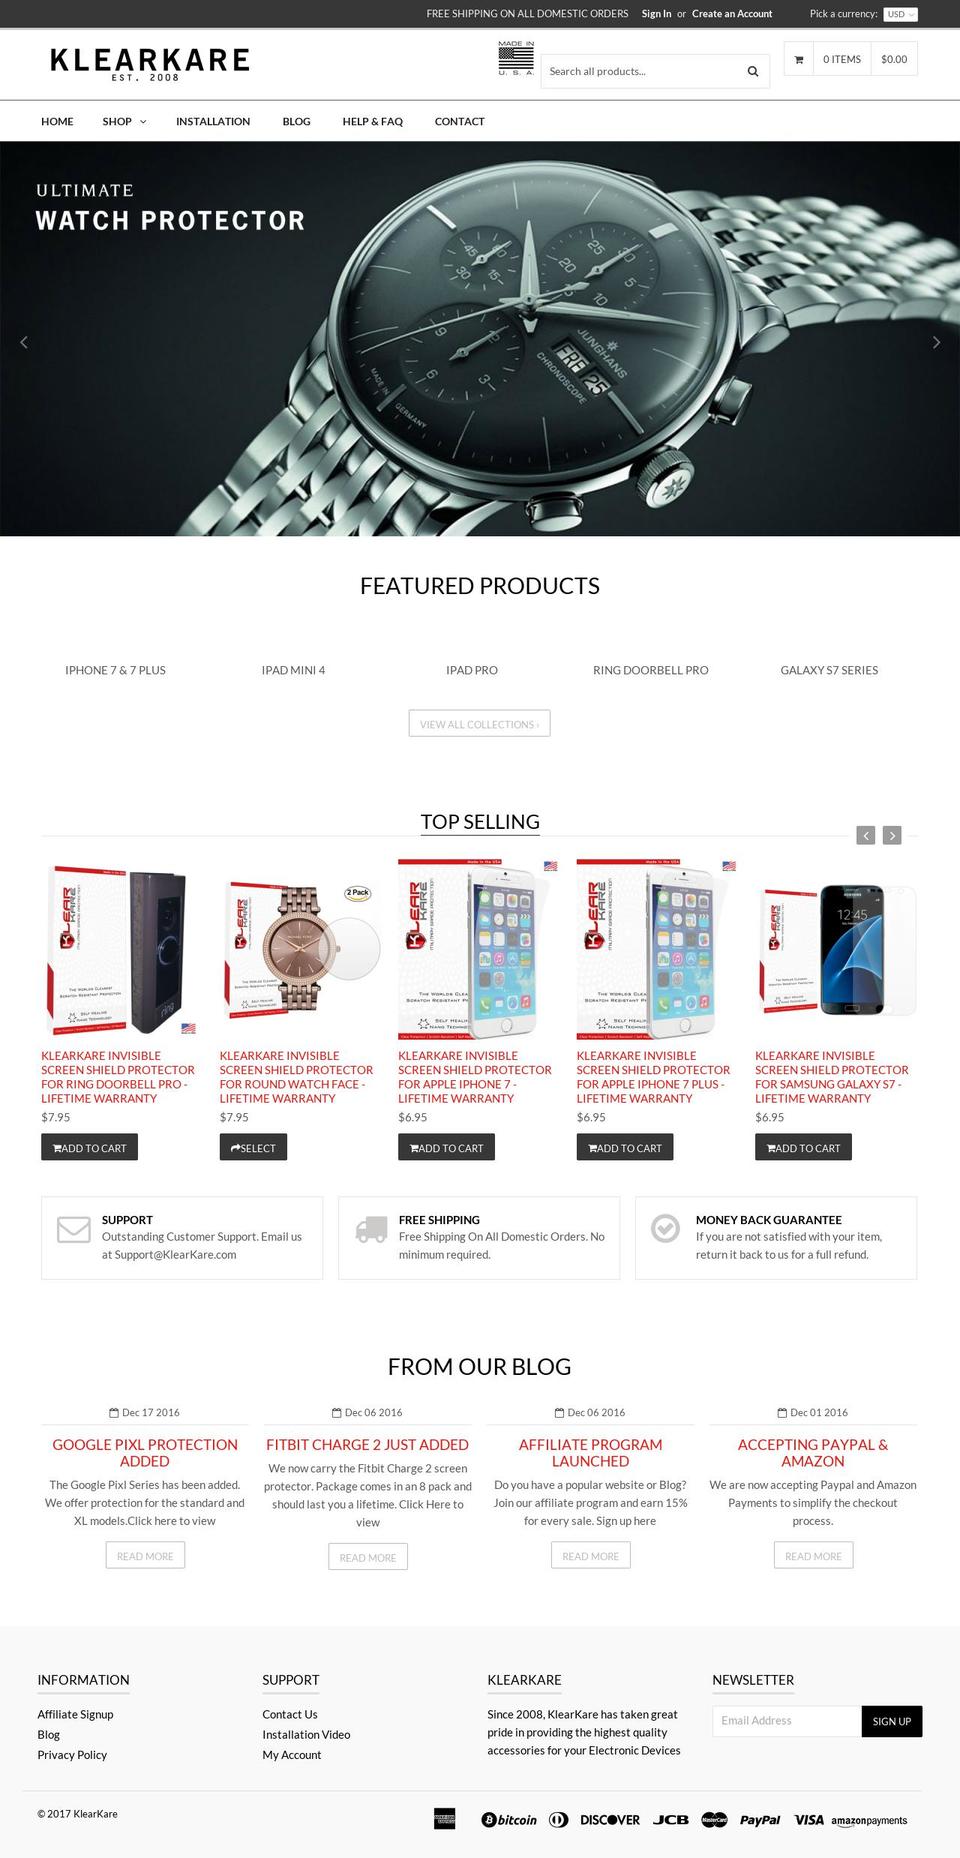 qrack Shopify theme site example klearkare.com